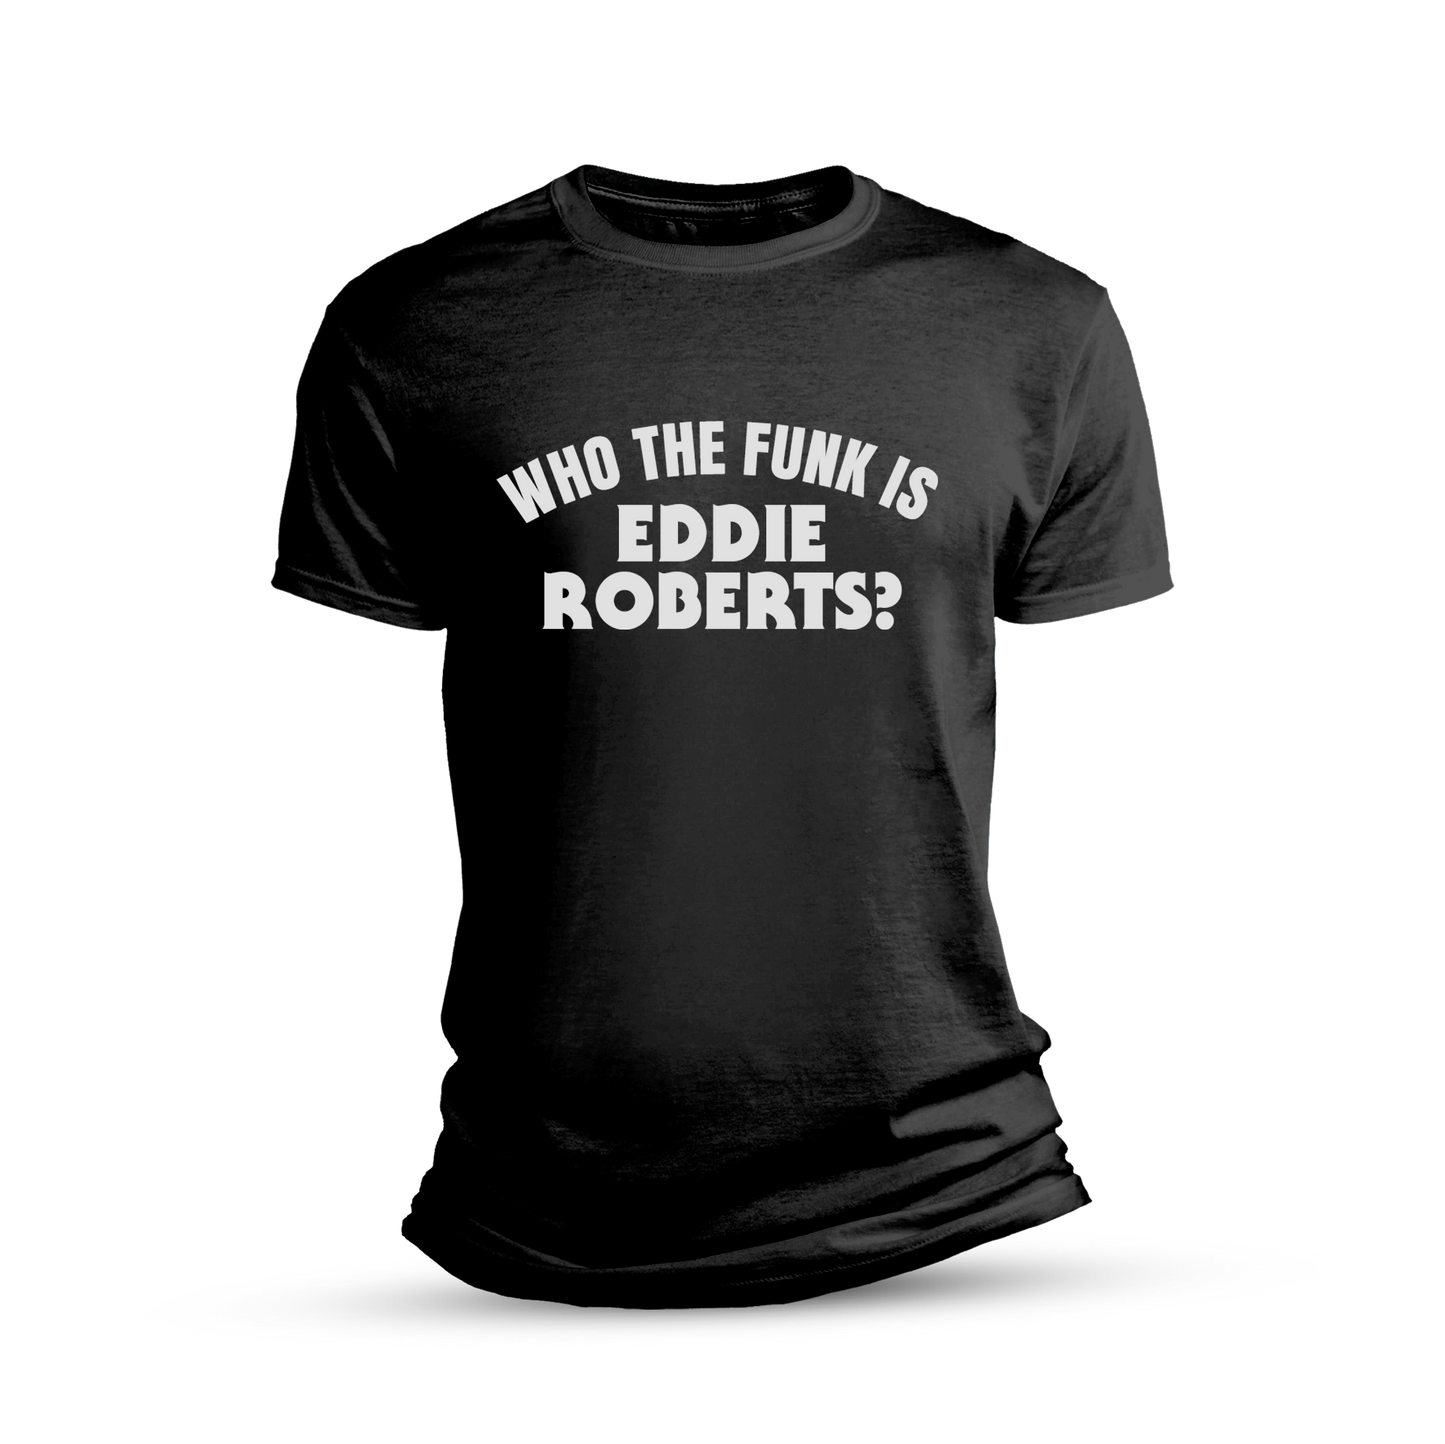 Who The Funk is Eddie Roberts? T-Shirt